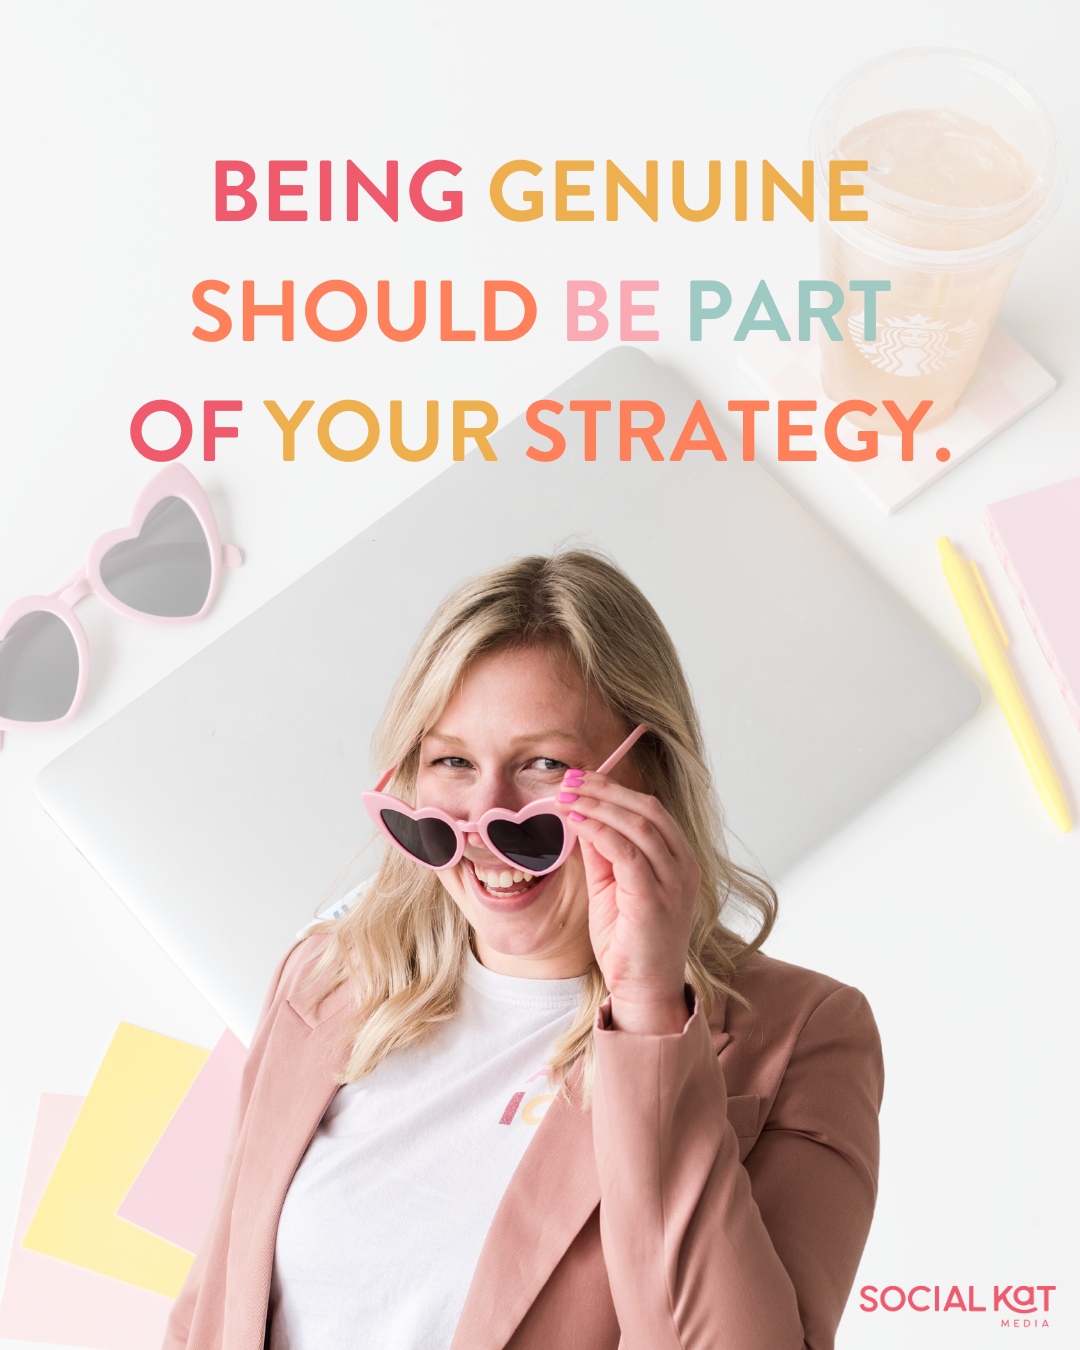 Being genuine should be part of your strategy. A woman in a pink blazer looks out playfully from behind heart shaped glasses.